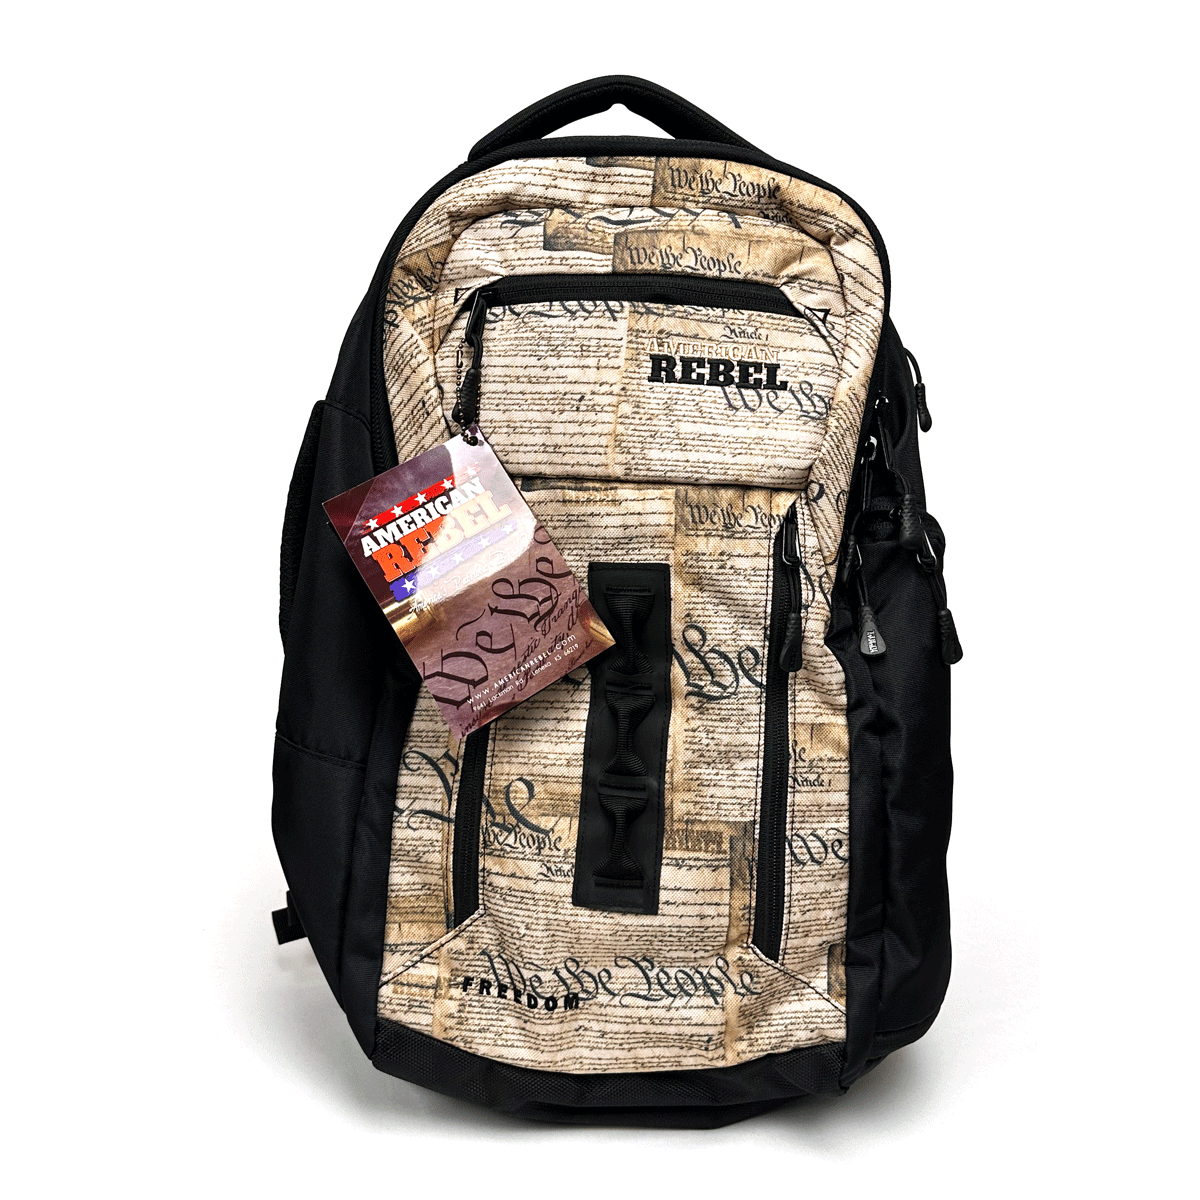 American Rebel We The People CCW Backpack - Large